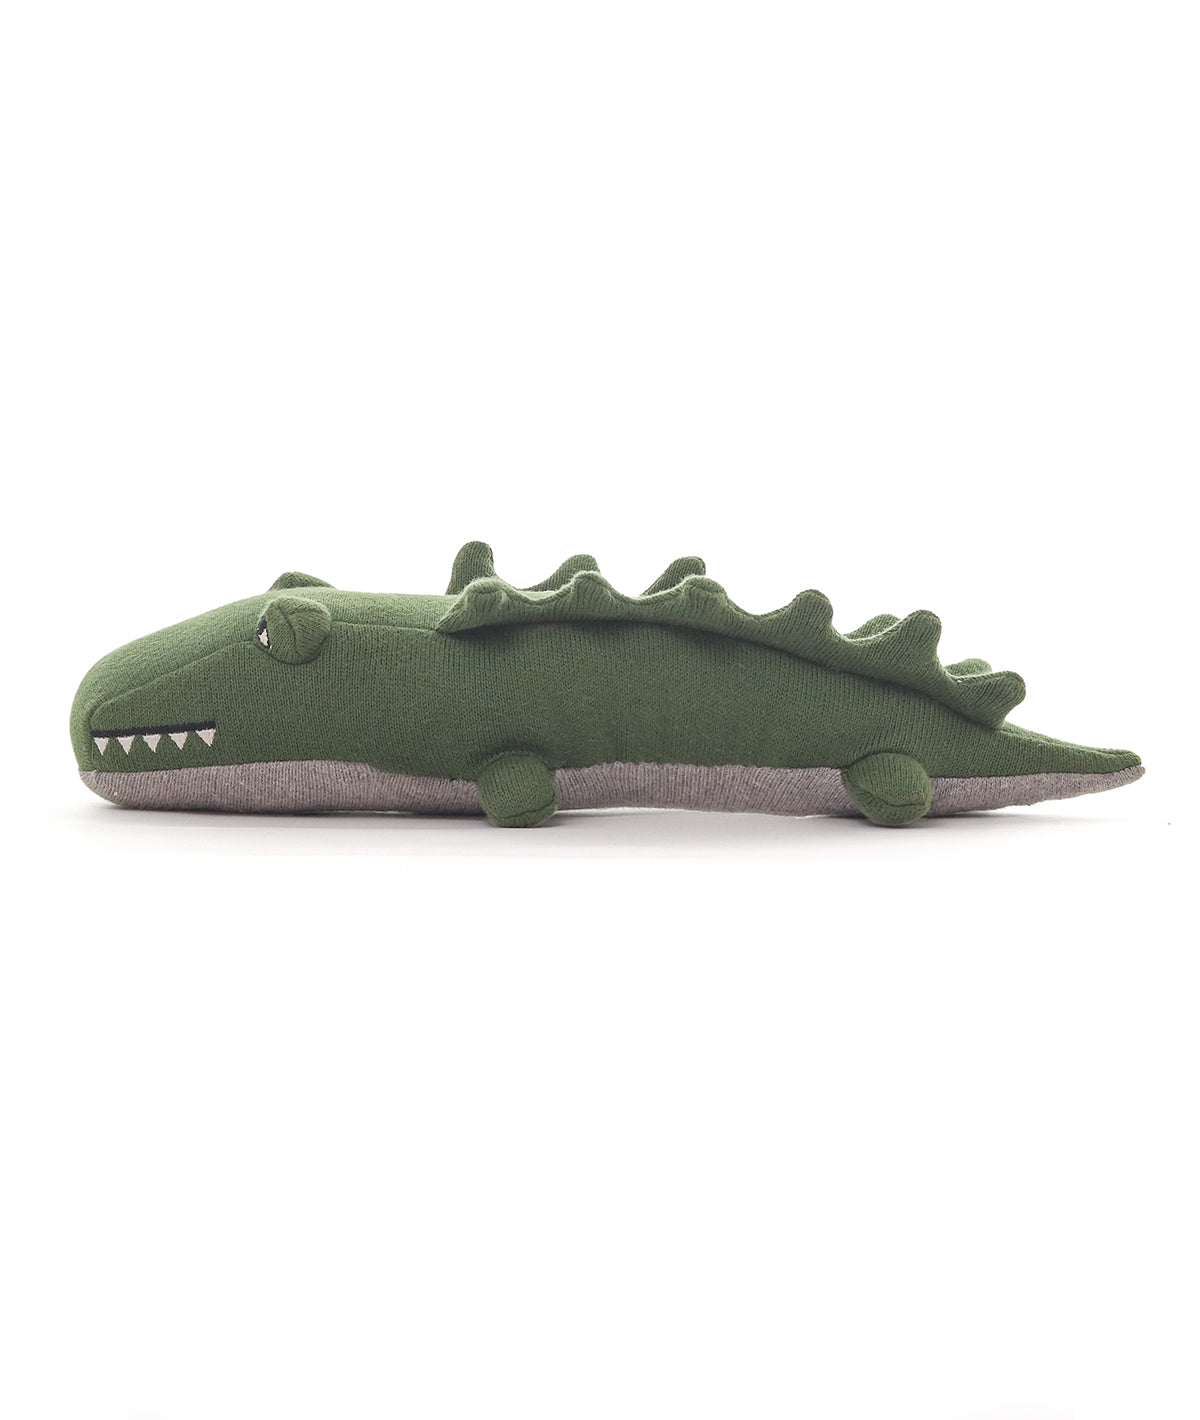 Junior Jaws Cotton Knitted Stuffed Soft Toy (Green, Light Grey Melange)